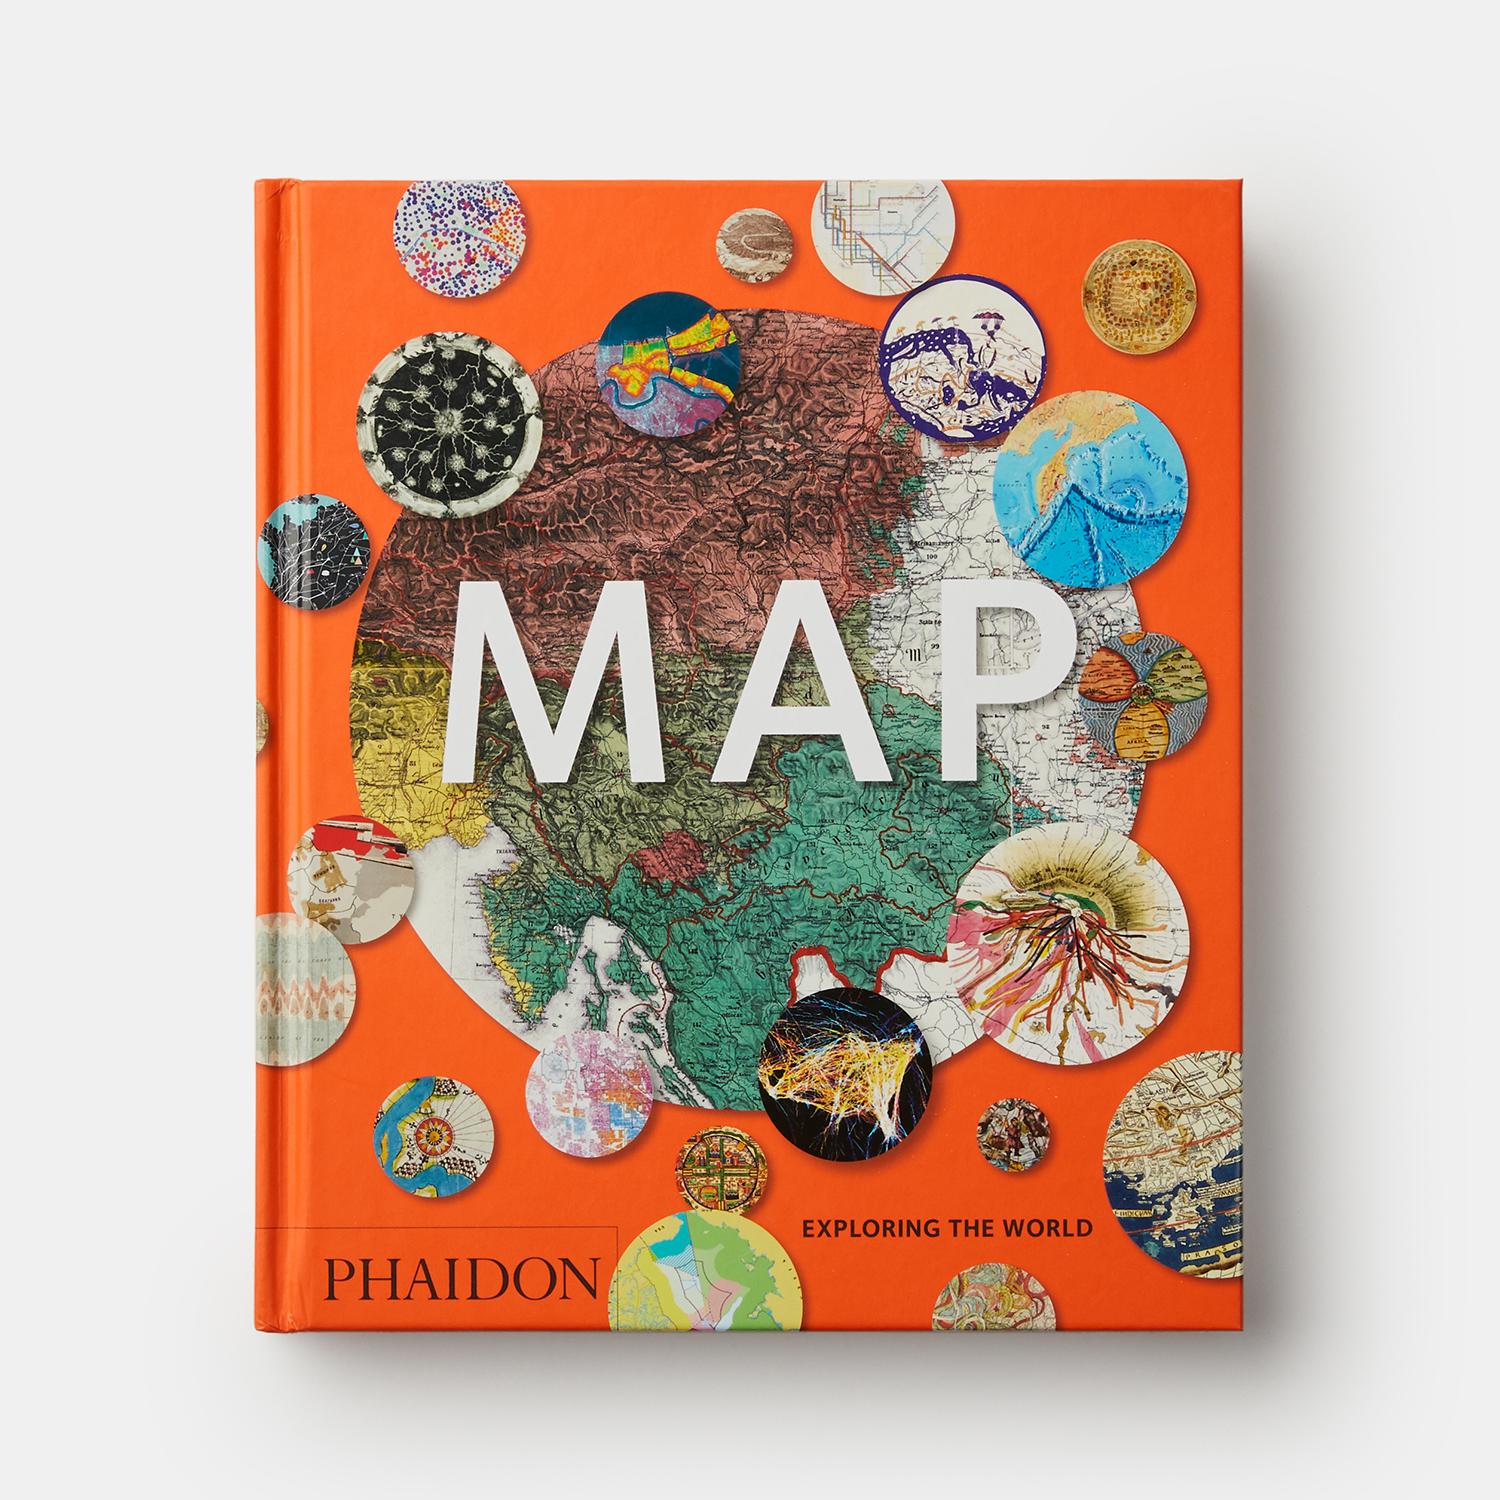 A compelling exploration of the ways that humans have mapped the world throughout history - now in a compact new edition




Map: Exploring the World brings together more than 250 fascinating examples of maps from the birth of cartography to